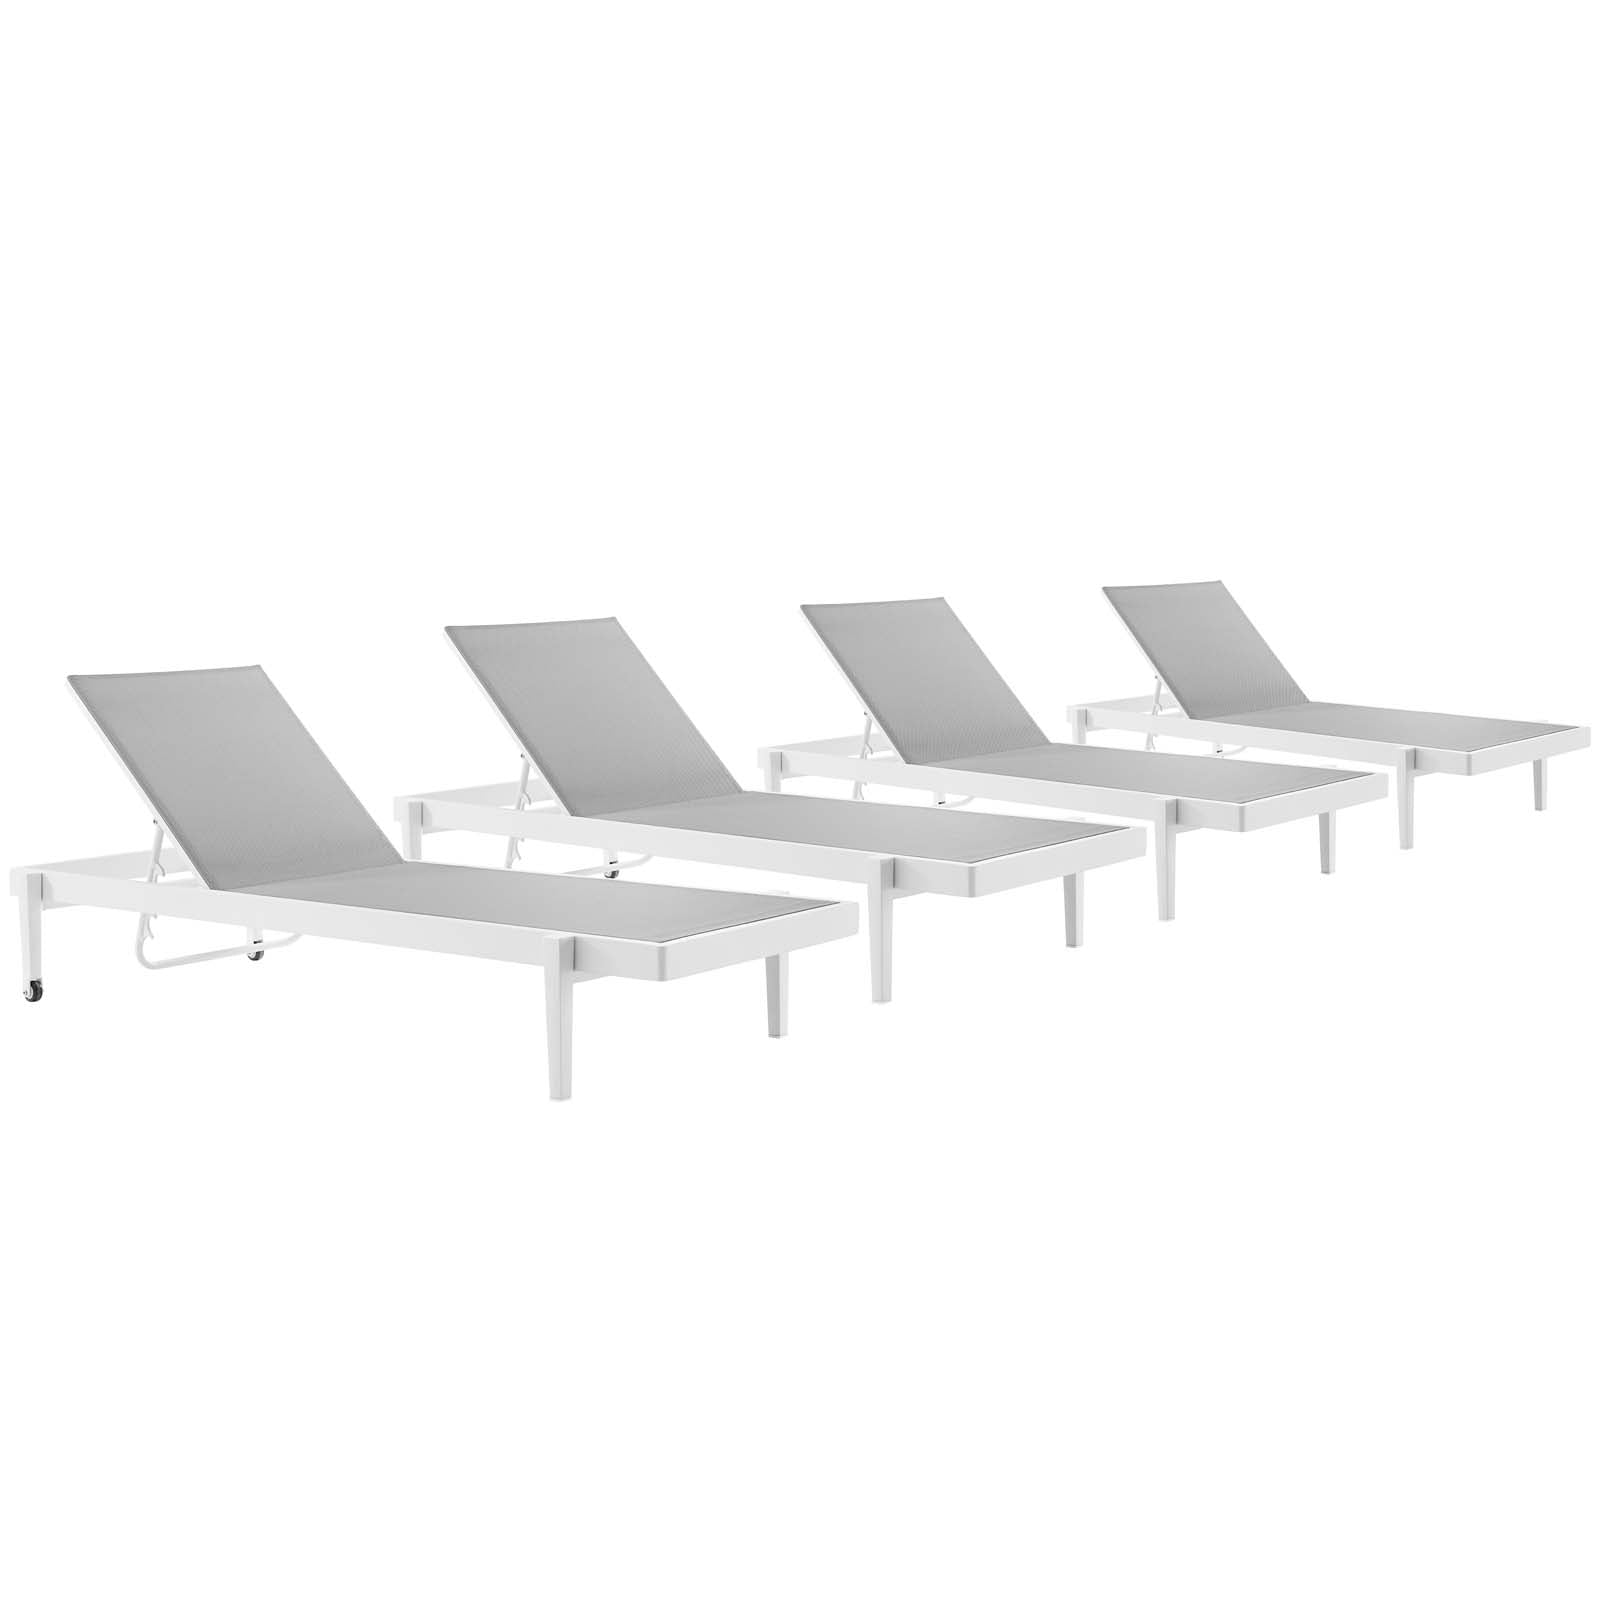 Modway Outdoor Loungers - Charleston Outdoor Patio Aluminum Chaise Lounge Chair Set of 4 White Gray